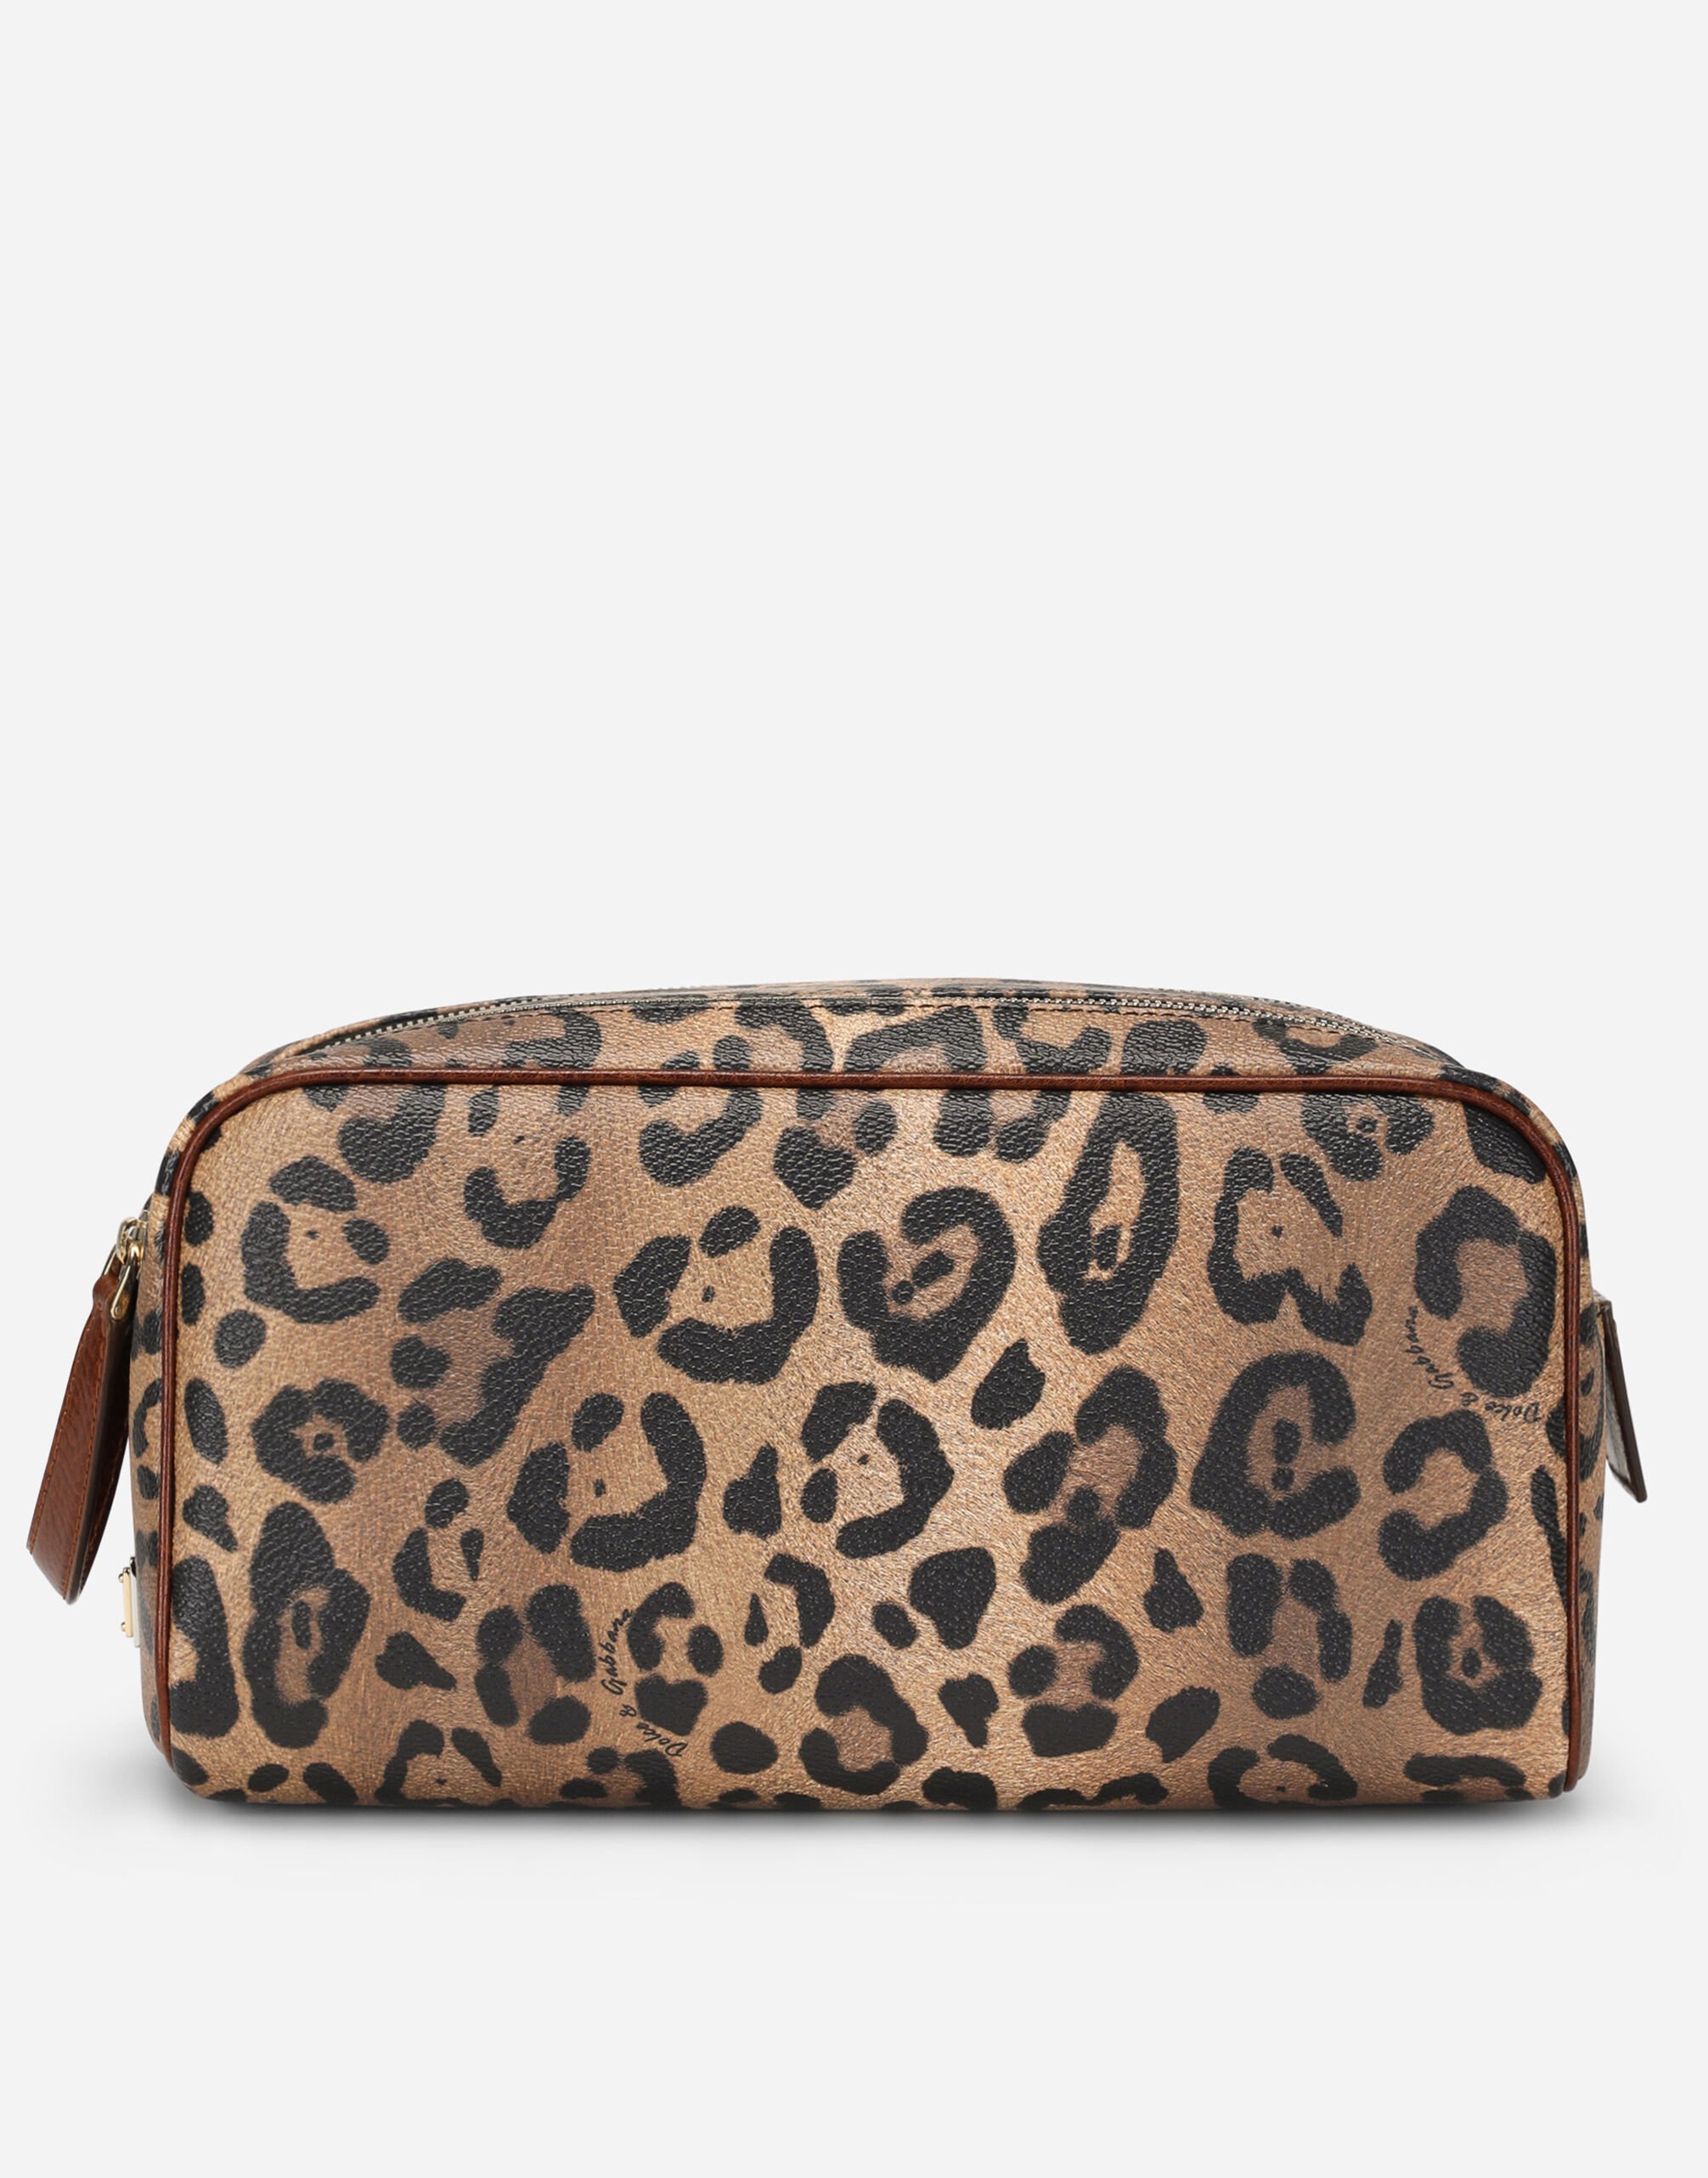 Dolce & Gabbana Leopard-print Crespo toiletry bag with branded plate Multicolor BB2211AW384